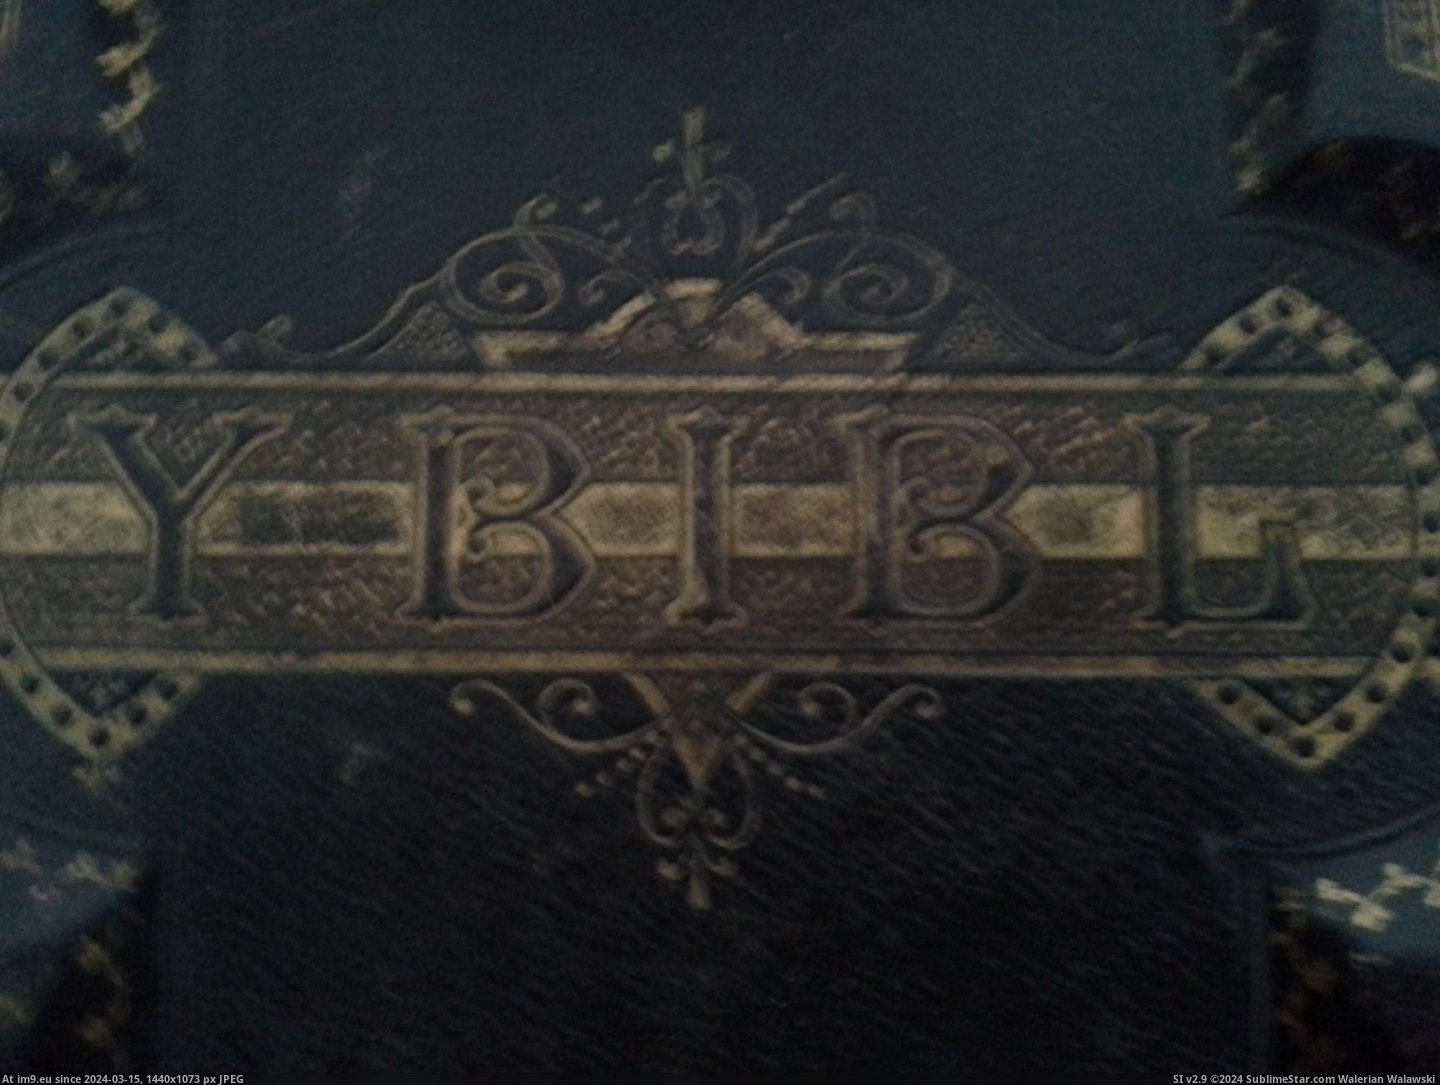 #Huge #Old #Christmas #Ornate #Welsh #Tree #Grandfather #Bible [Pics] I found my grandfather's old, ornate, huge Welsh bible while getting down the Christmas tree. 14 Pic. (Image of album My r/PICS favs))